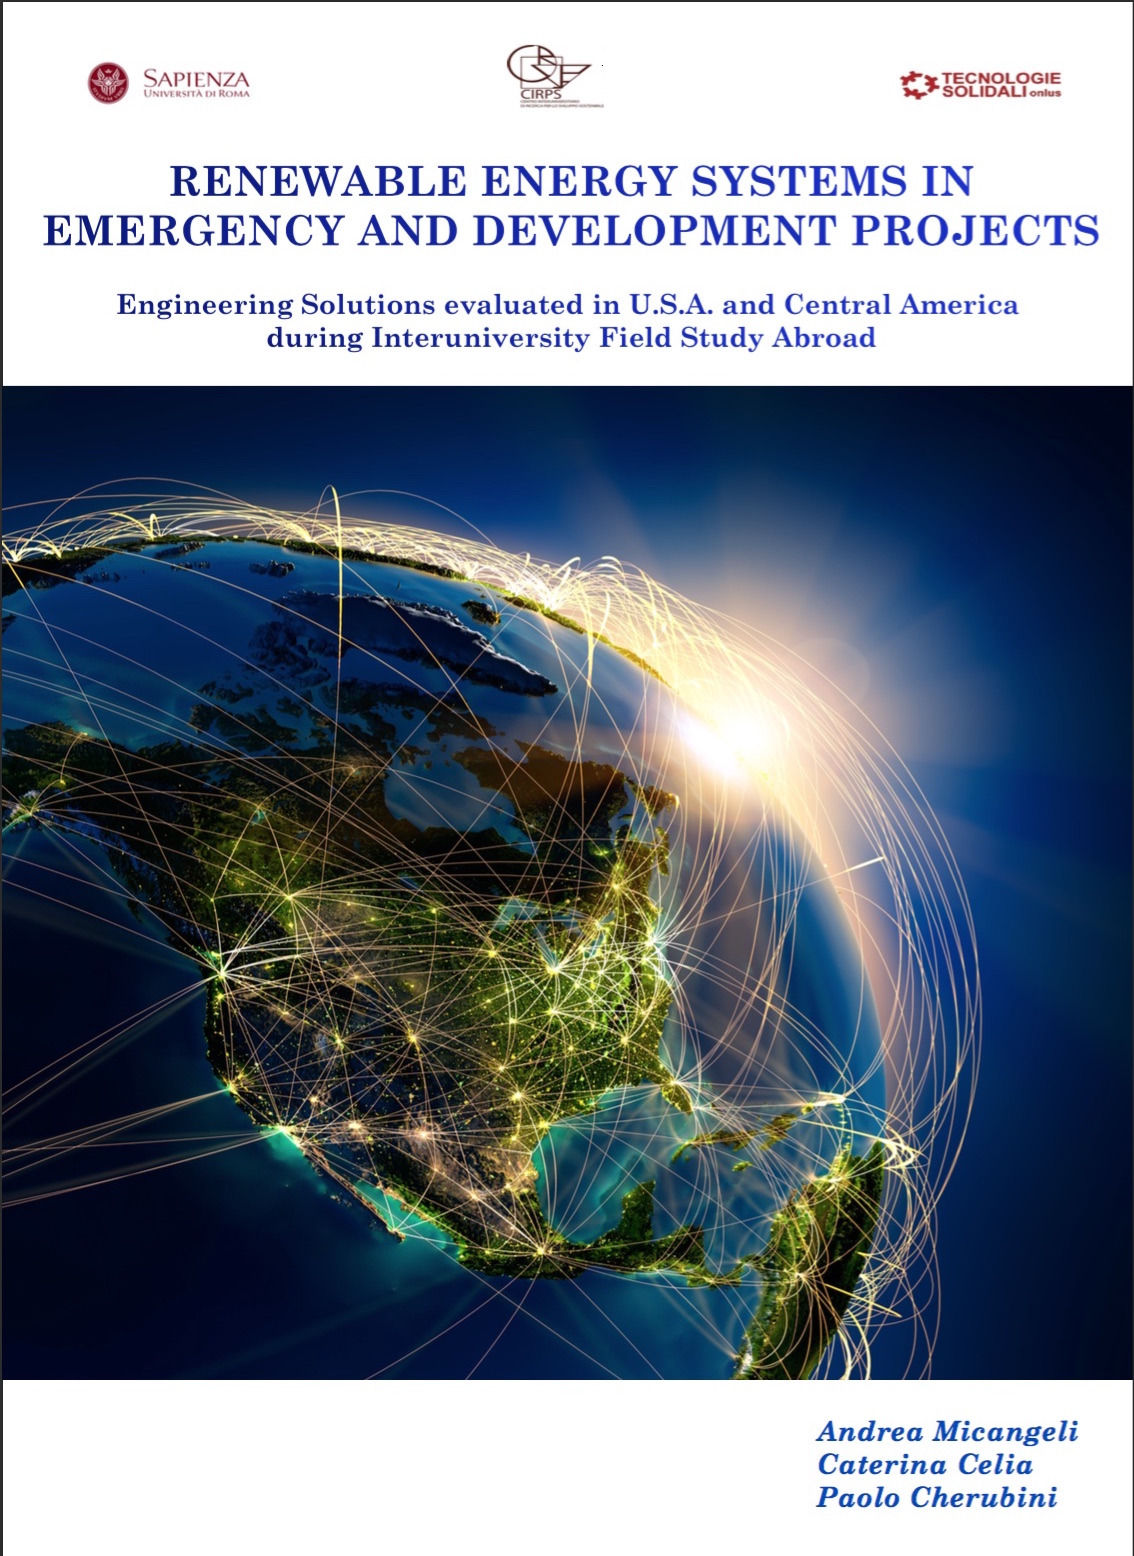 Copertina di Renewable energy systems in emergency and development projects. Engineering solutions evaluated in Central America during interuniversity field study abroad